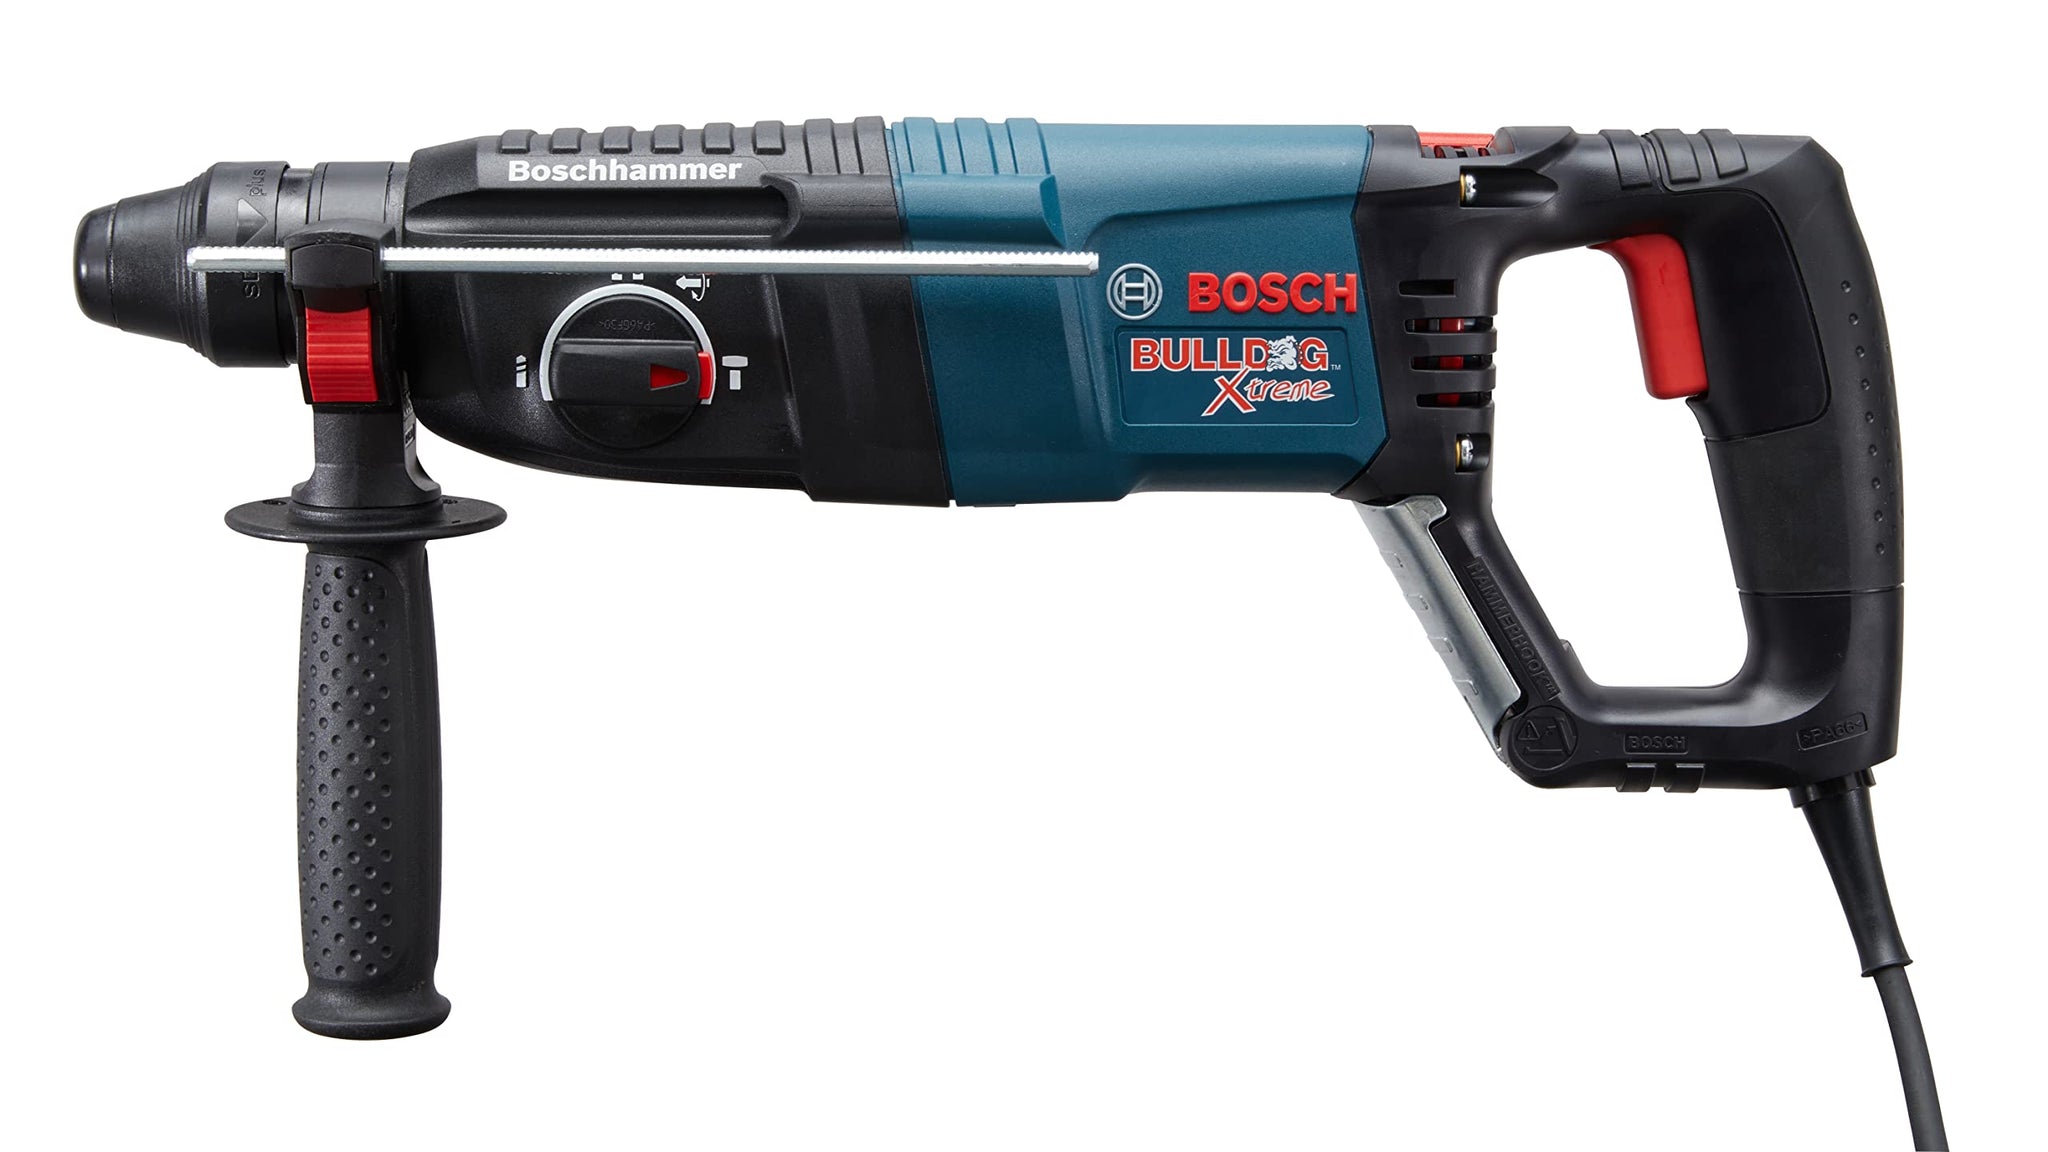 BOSCH 11255VSR Bulldog Xtreme 8 Amp 1 Inch Corded Variable Speed SDS-Plus Concrete